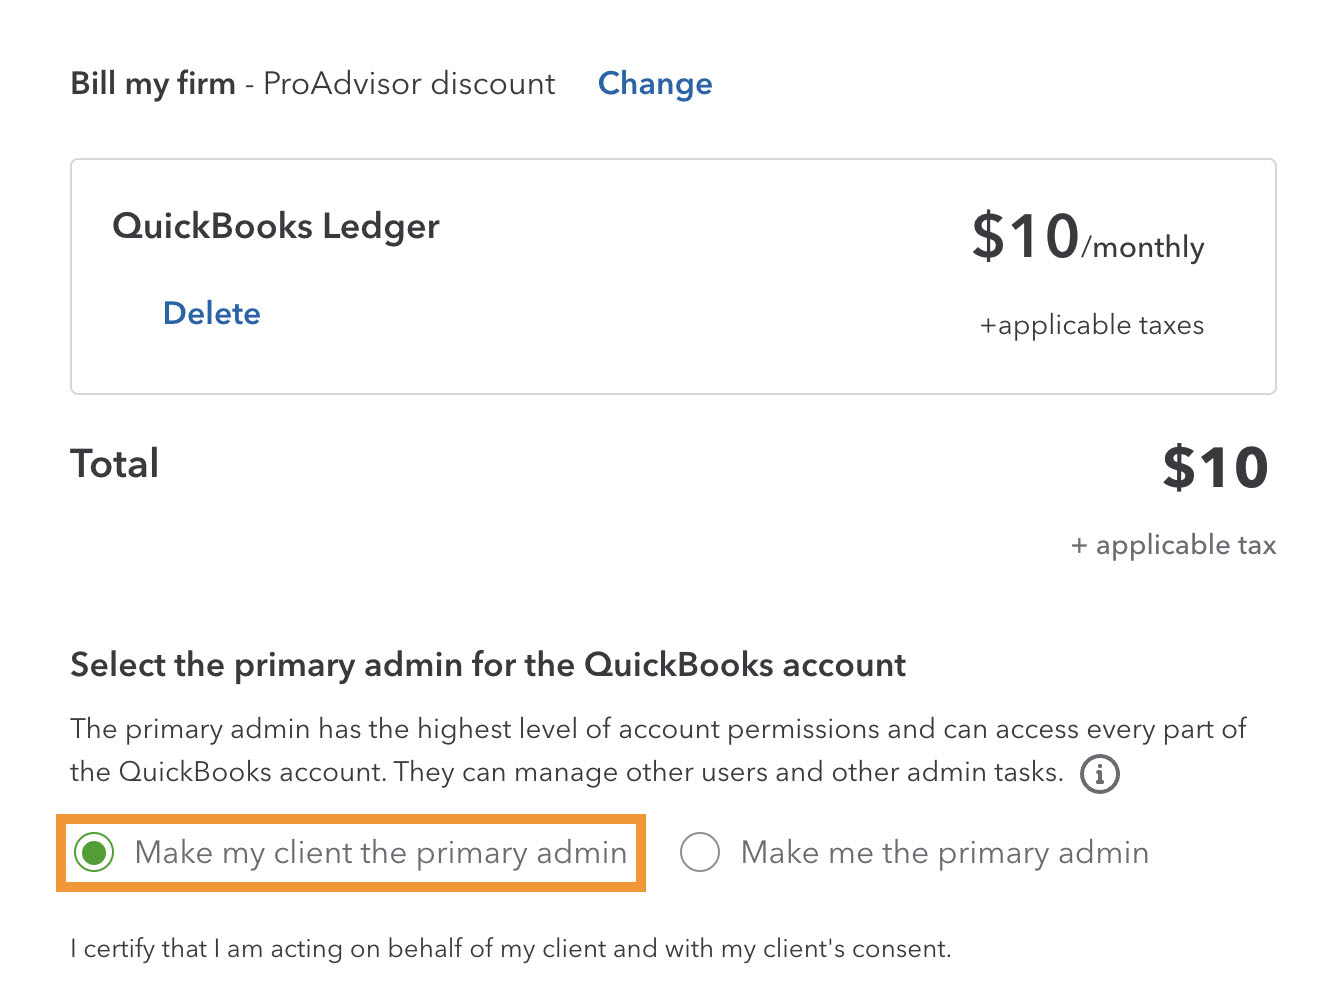 Section in the QuickBooks Ledger subscription page where you can add your client as the primary admin.